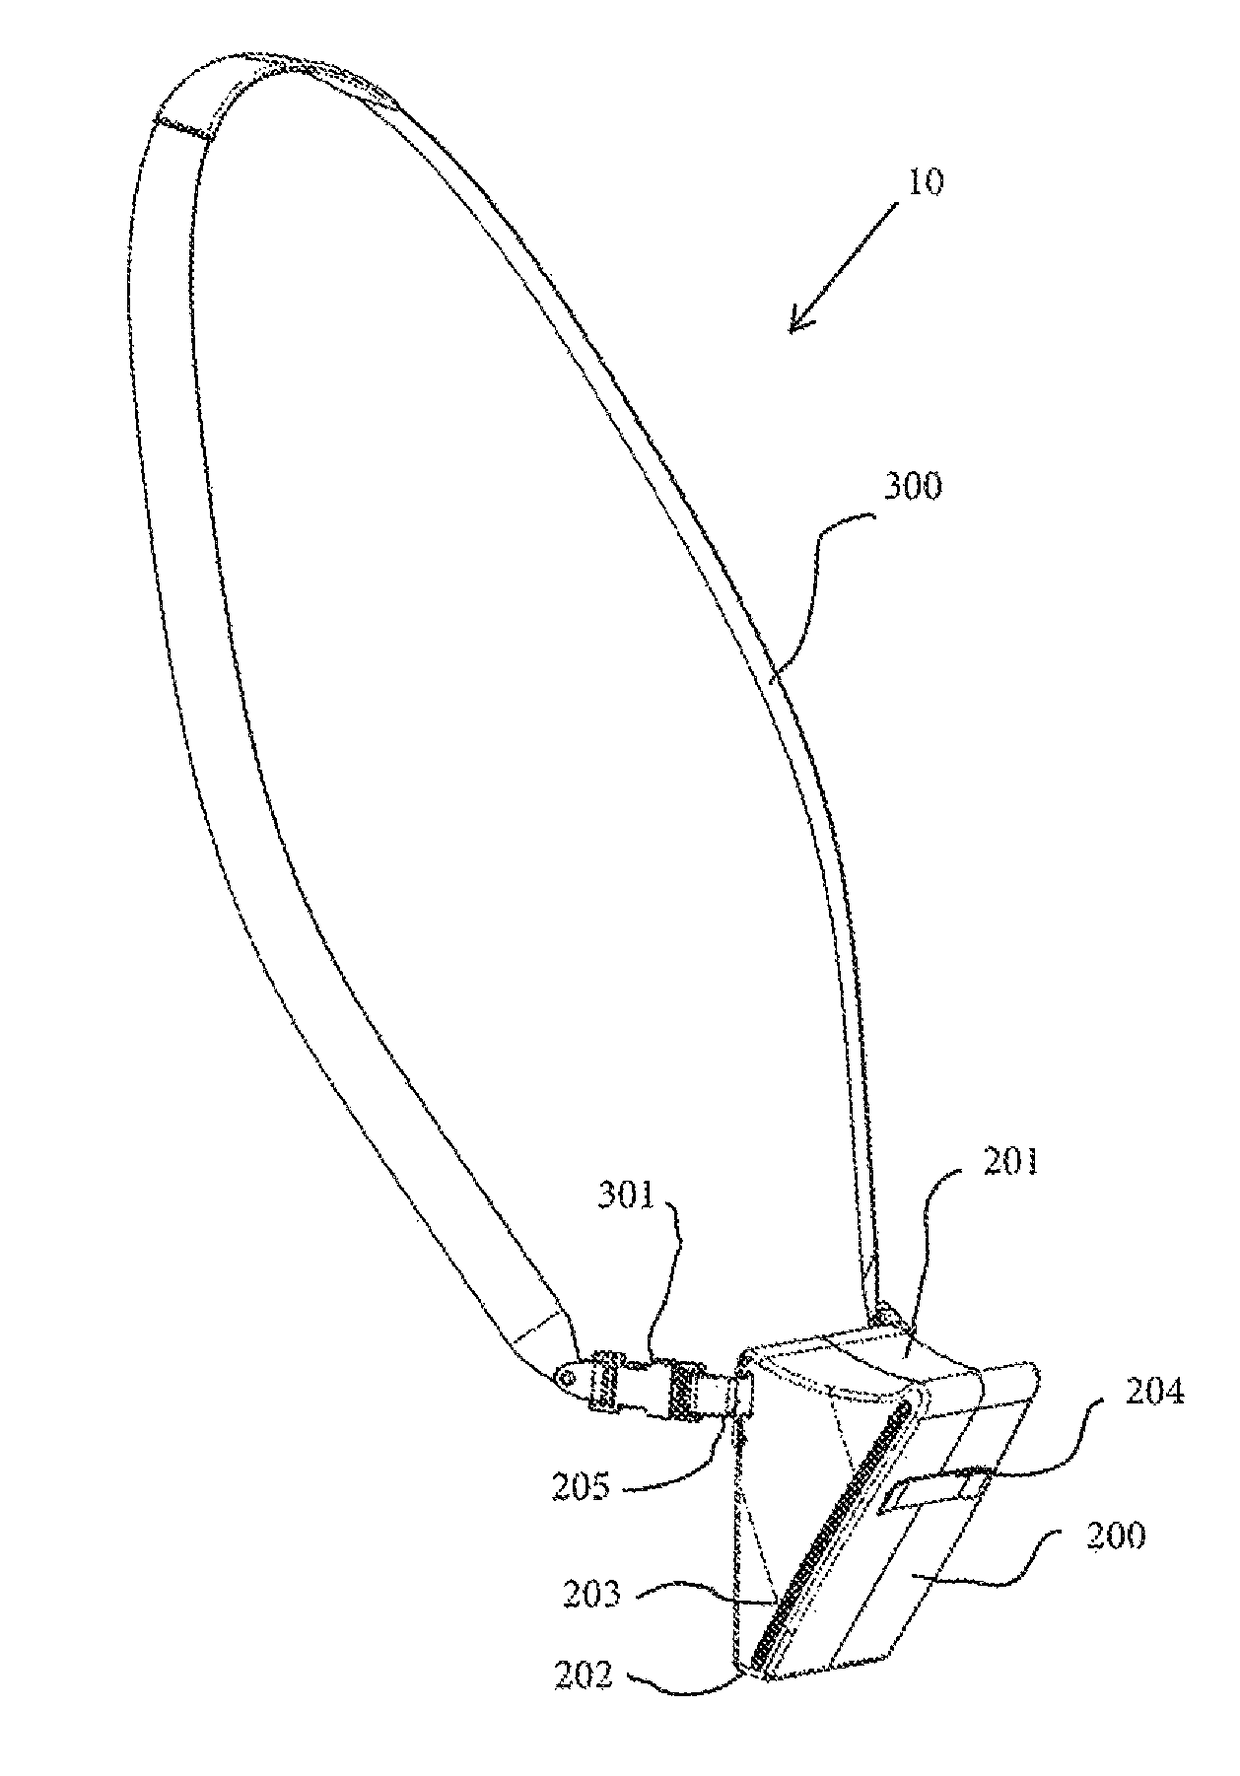 Hip extension device adapted for carrying objects